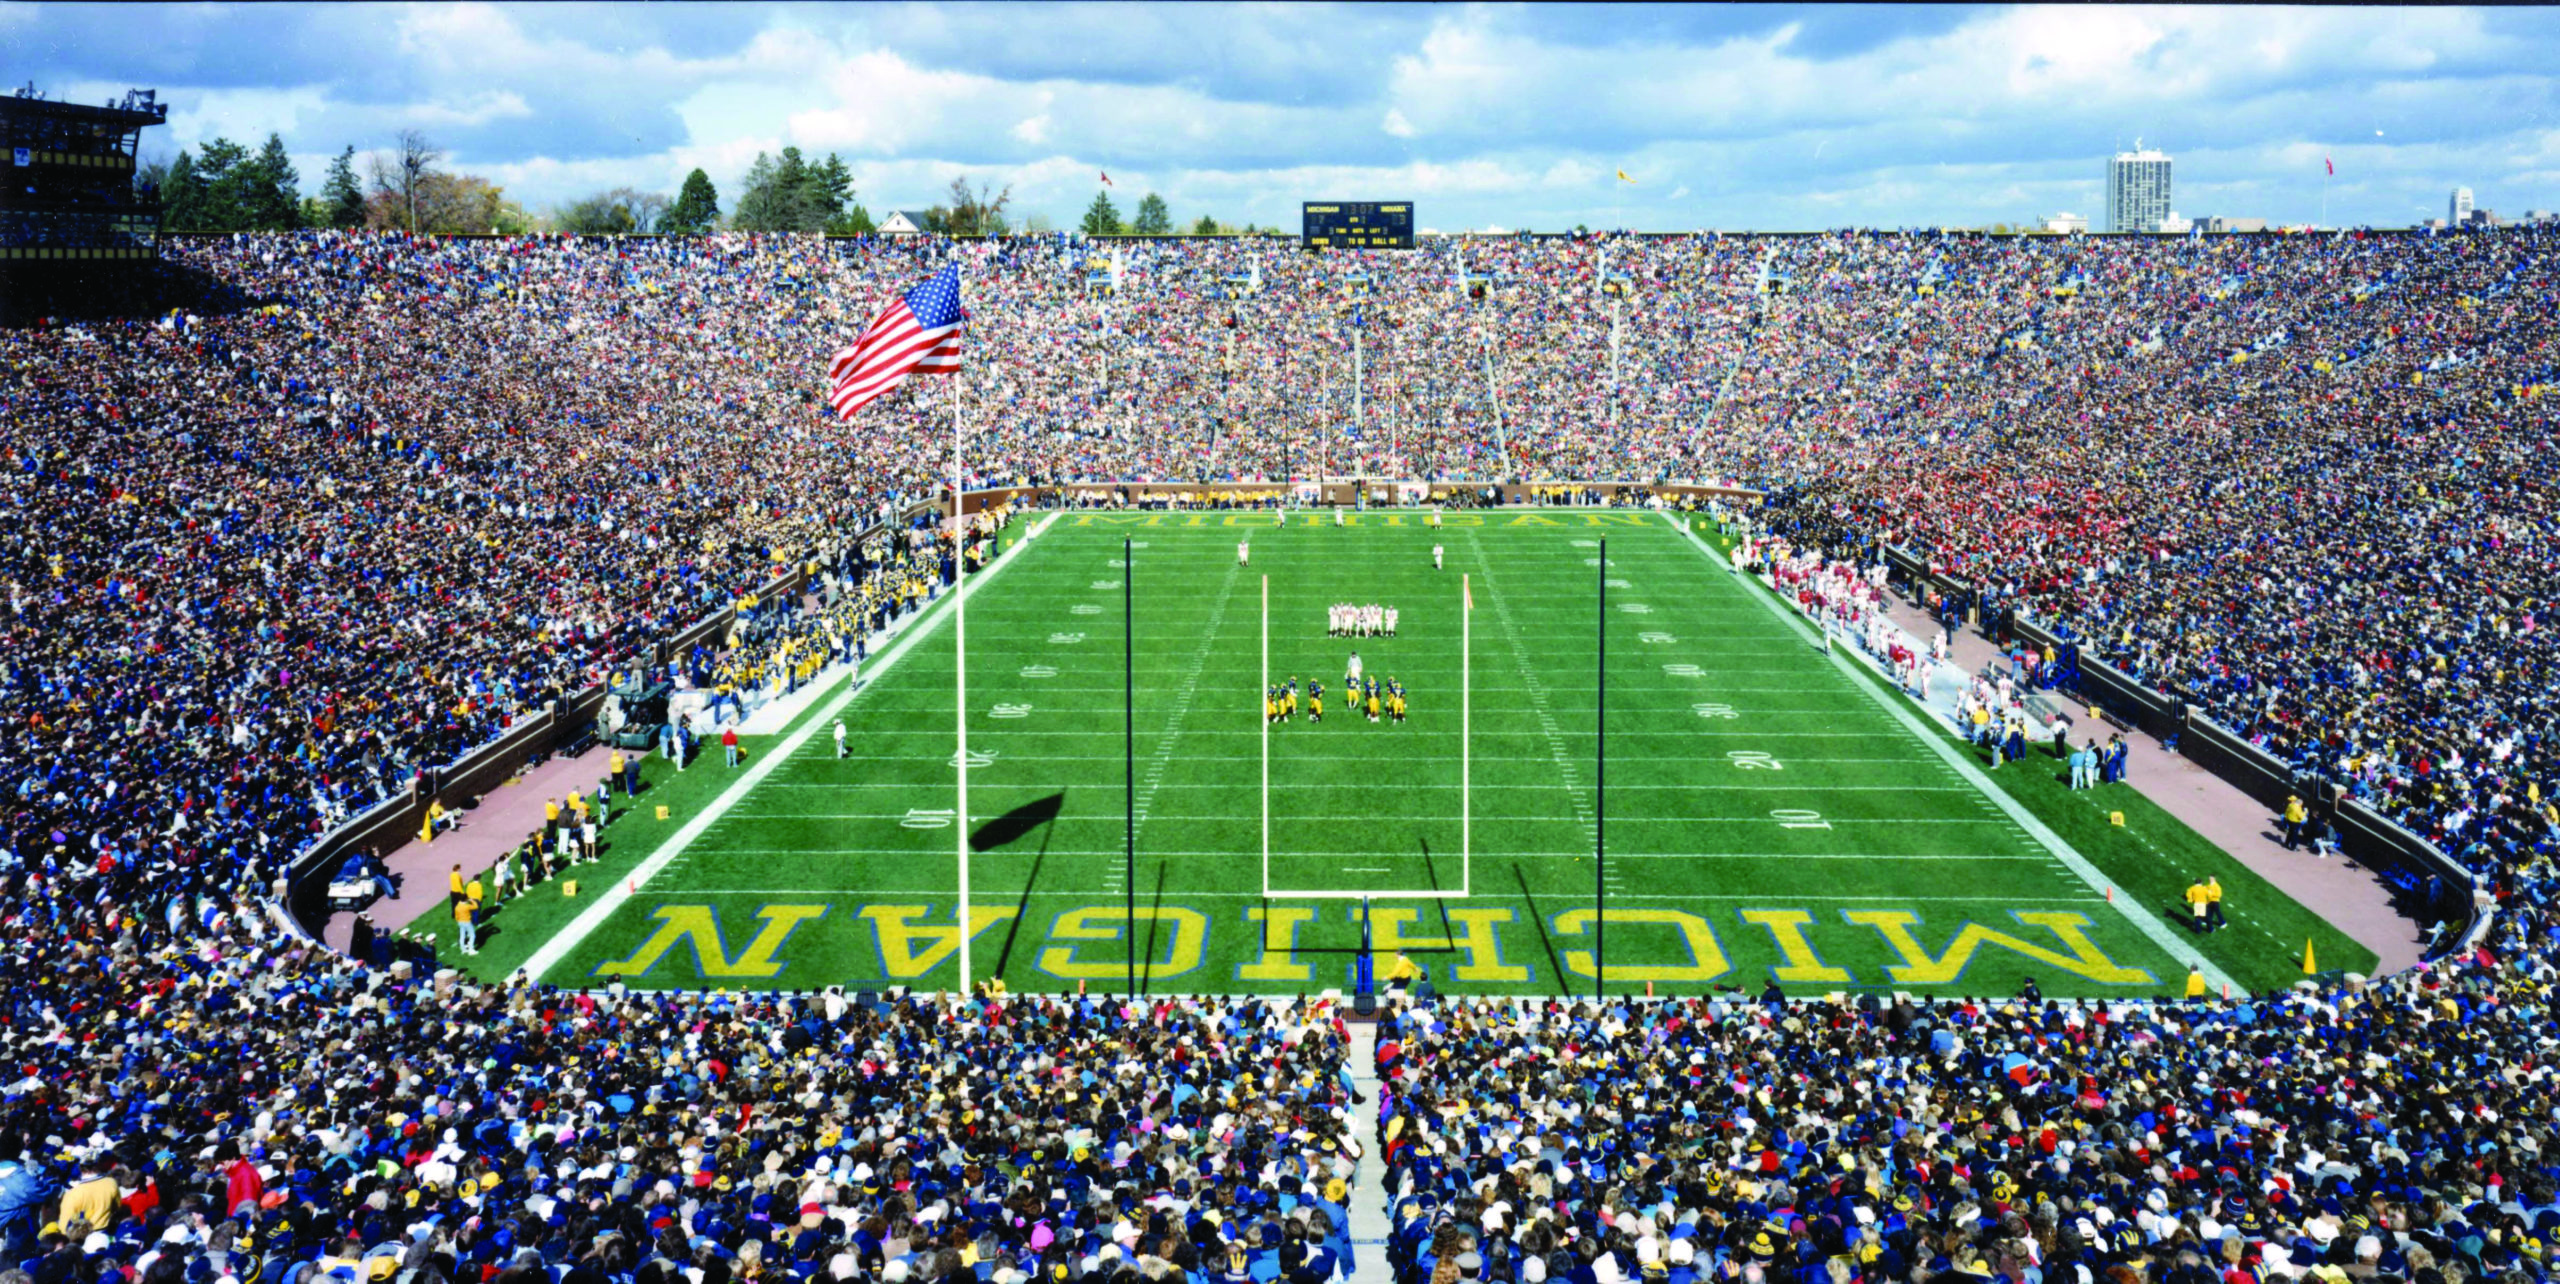 Michigan Stadium football field with the stands full of fans